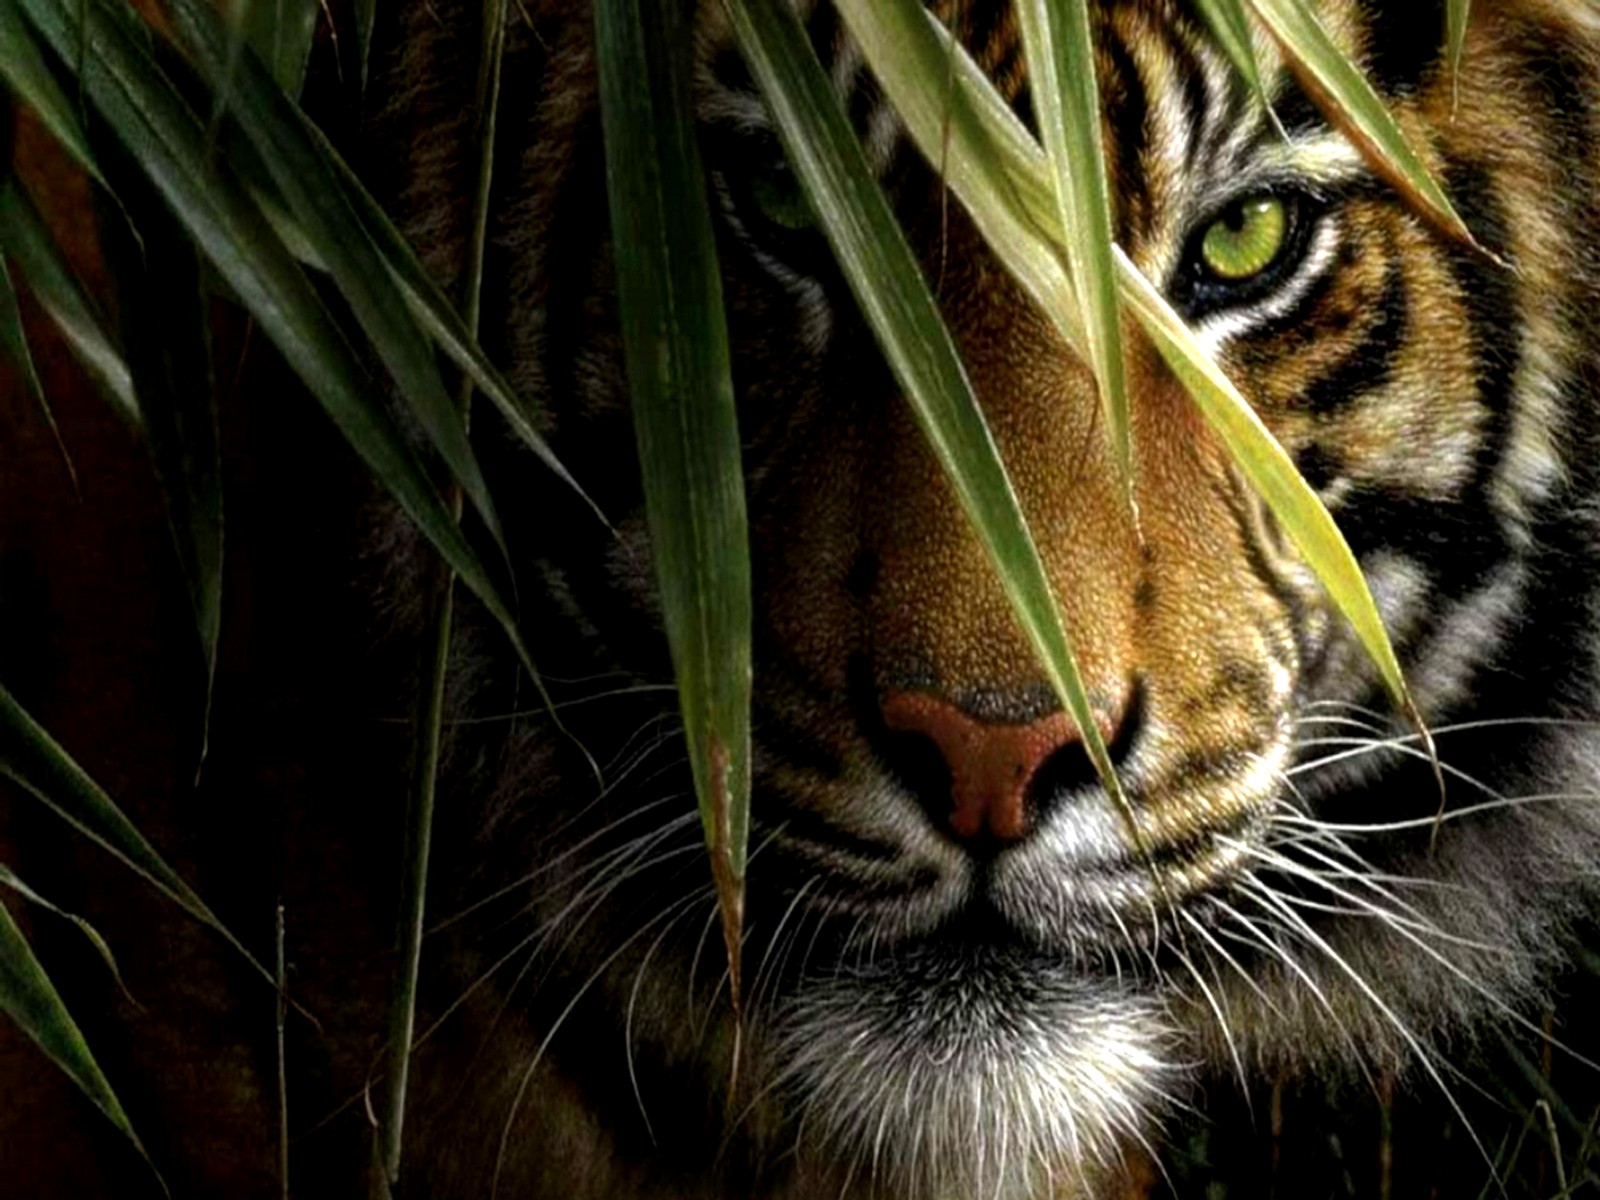 High Definition tiger wallpaper for free download